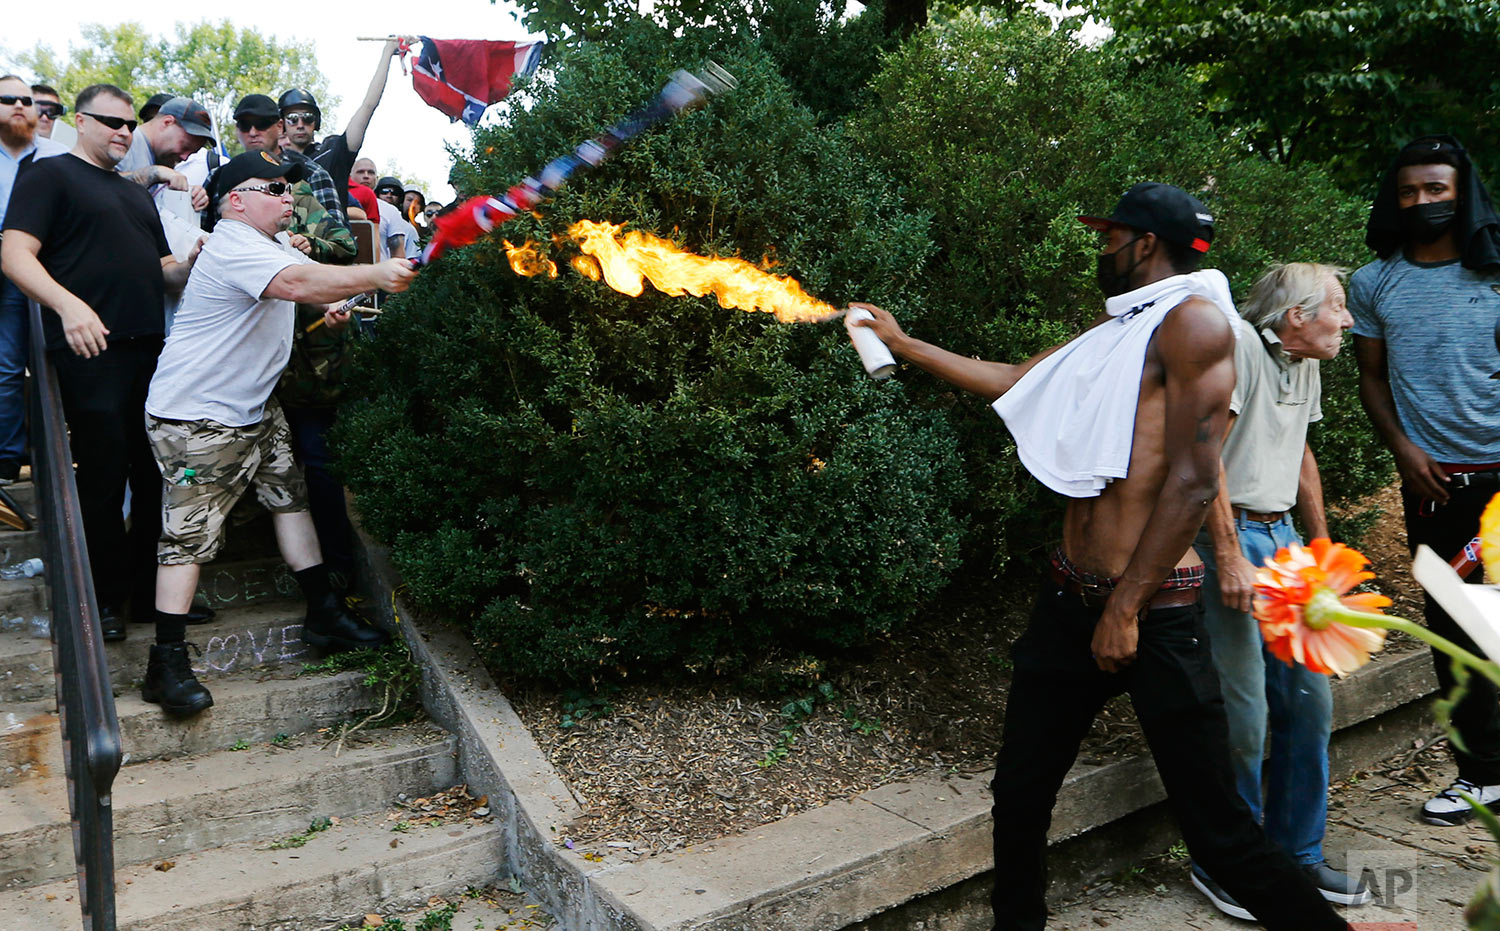  A counter demonstrator uses a lighted spray can against a white nationalist demonstrator at the entrance to Lee Park in Charlottesville, Va., Saturday, Aug. 12, 2017.   Gov. Terry McAuliffe declared a state of emergency and police dressed in riot ge